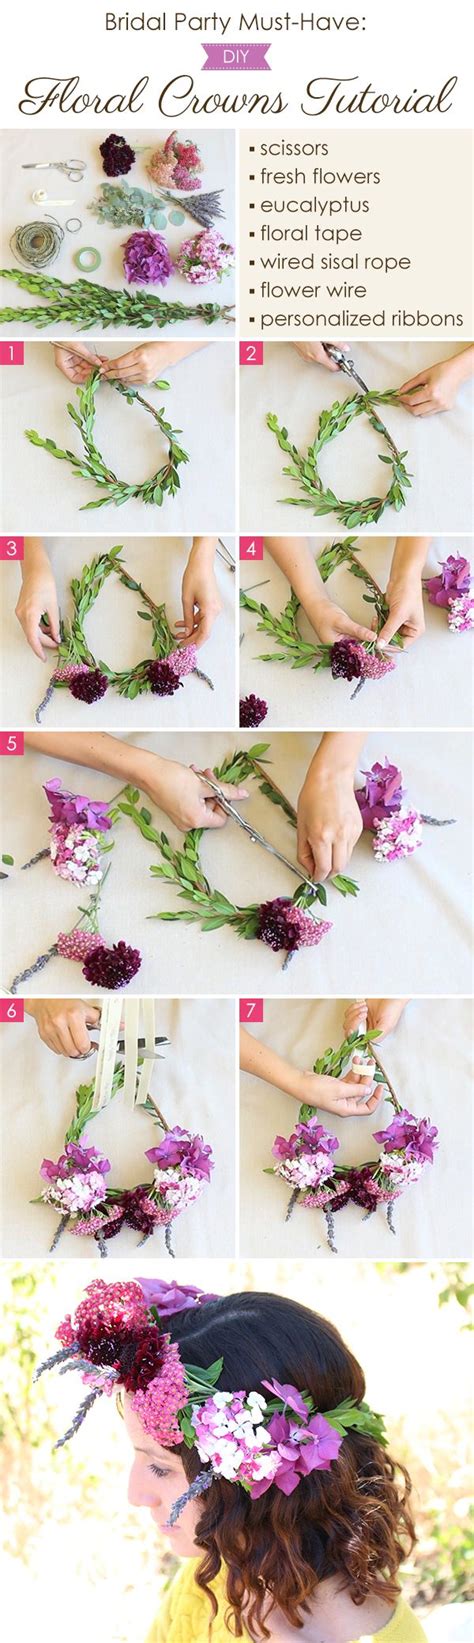 Bridal Party Must Have Diy Flower Crowns Tutorial By Home Sweet